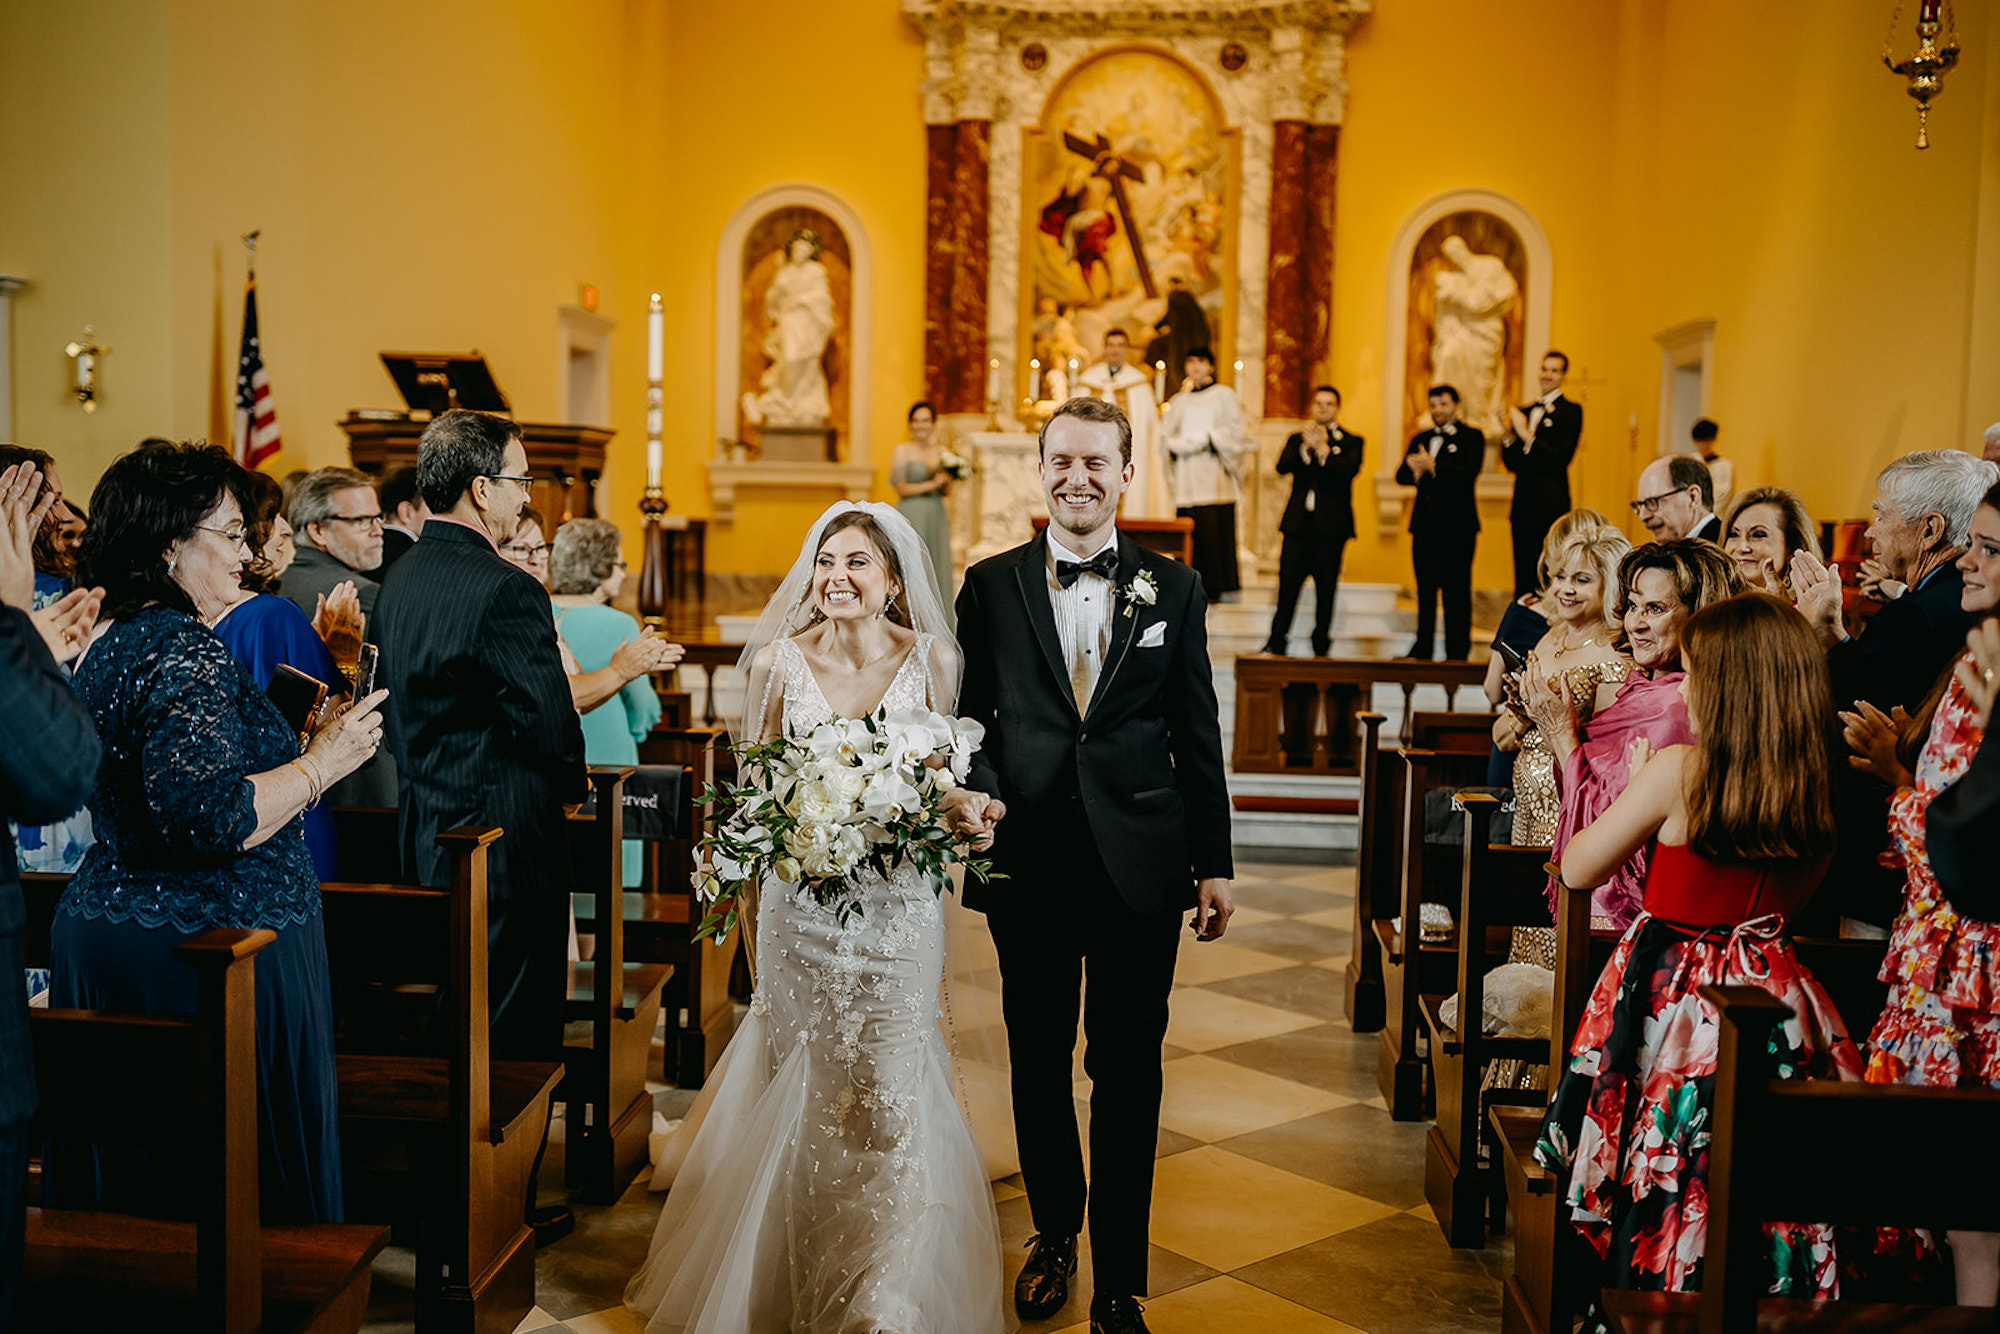 Bride and Groom Walking Down Aisle | Catholic Wedding Ceremony | Tampa Bay Church The Chapel of the Holy Cross